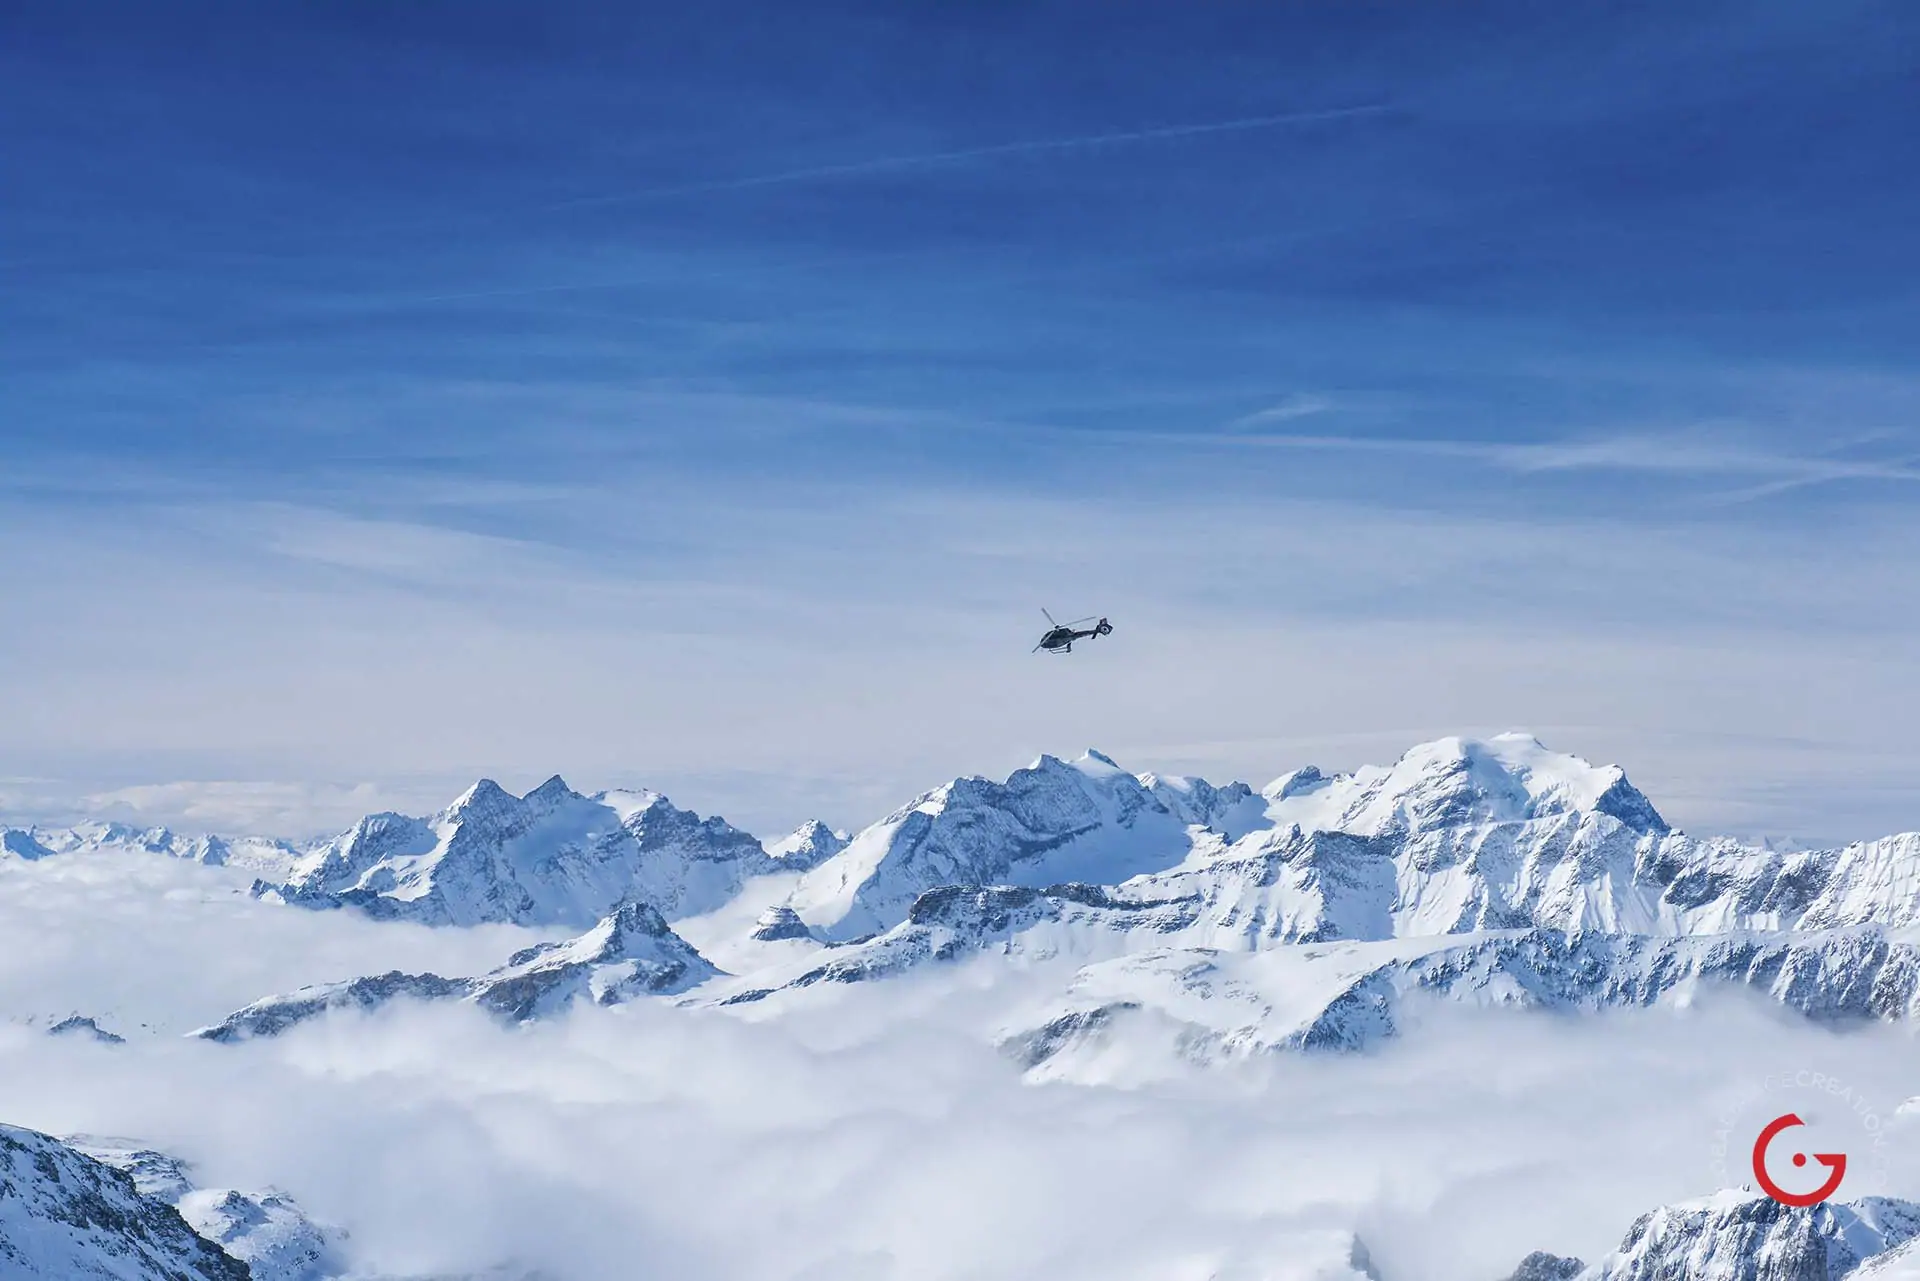 A Private Helicopter Hovers Over The Snow Covered Swiss Alps - Travel Photographer and Switzerland Photography